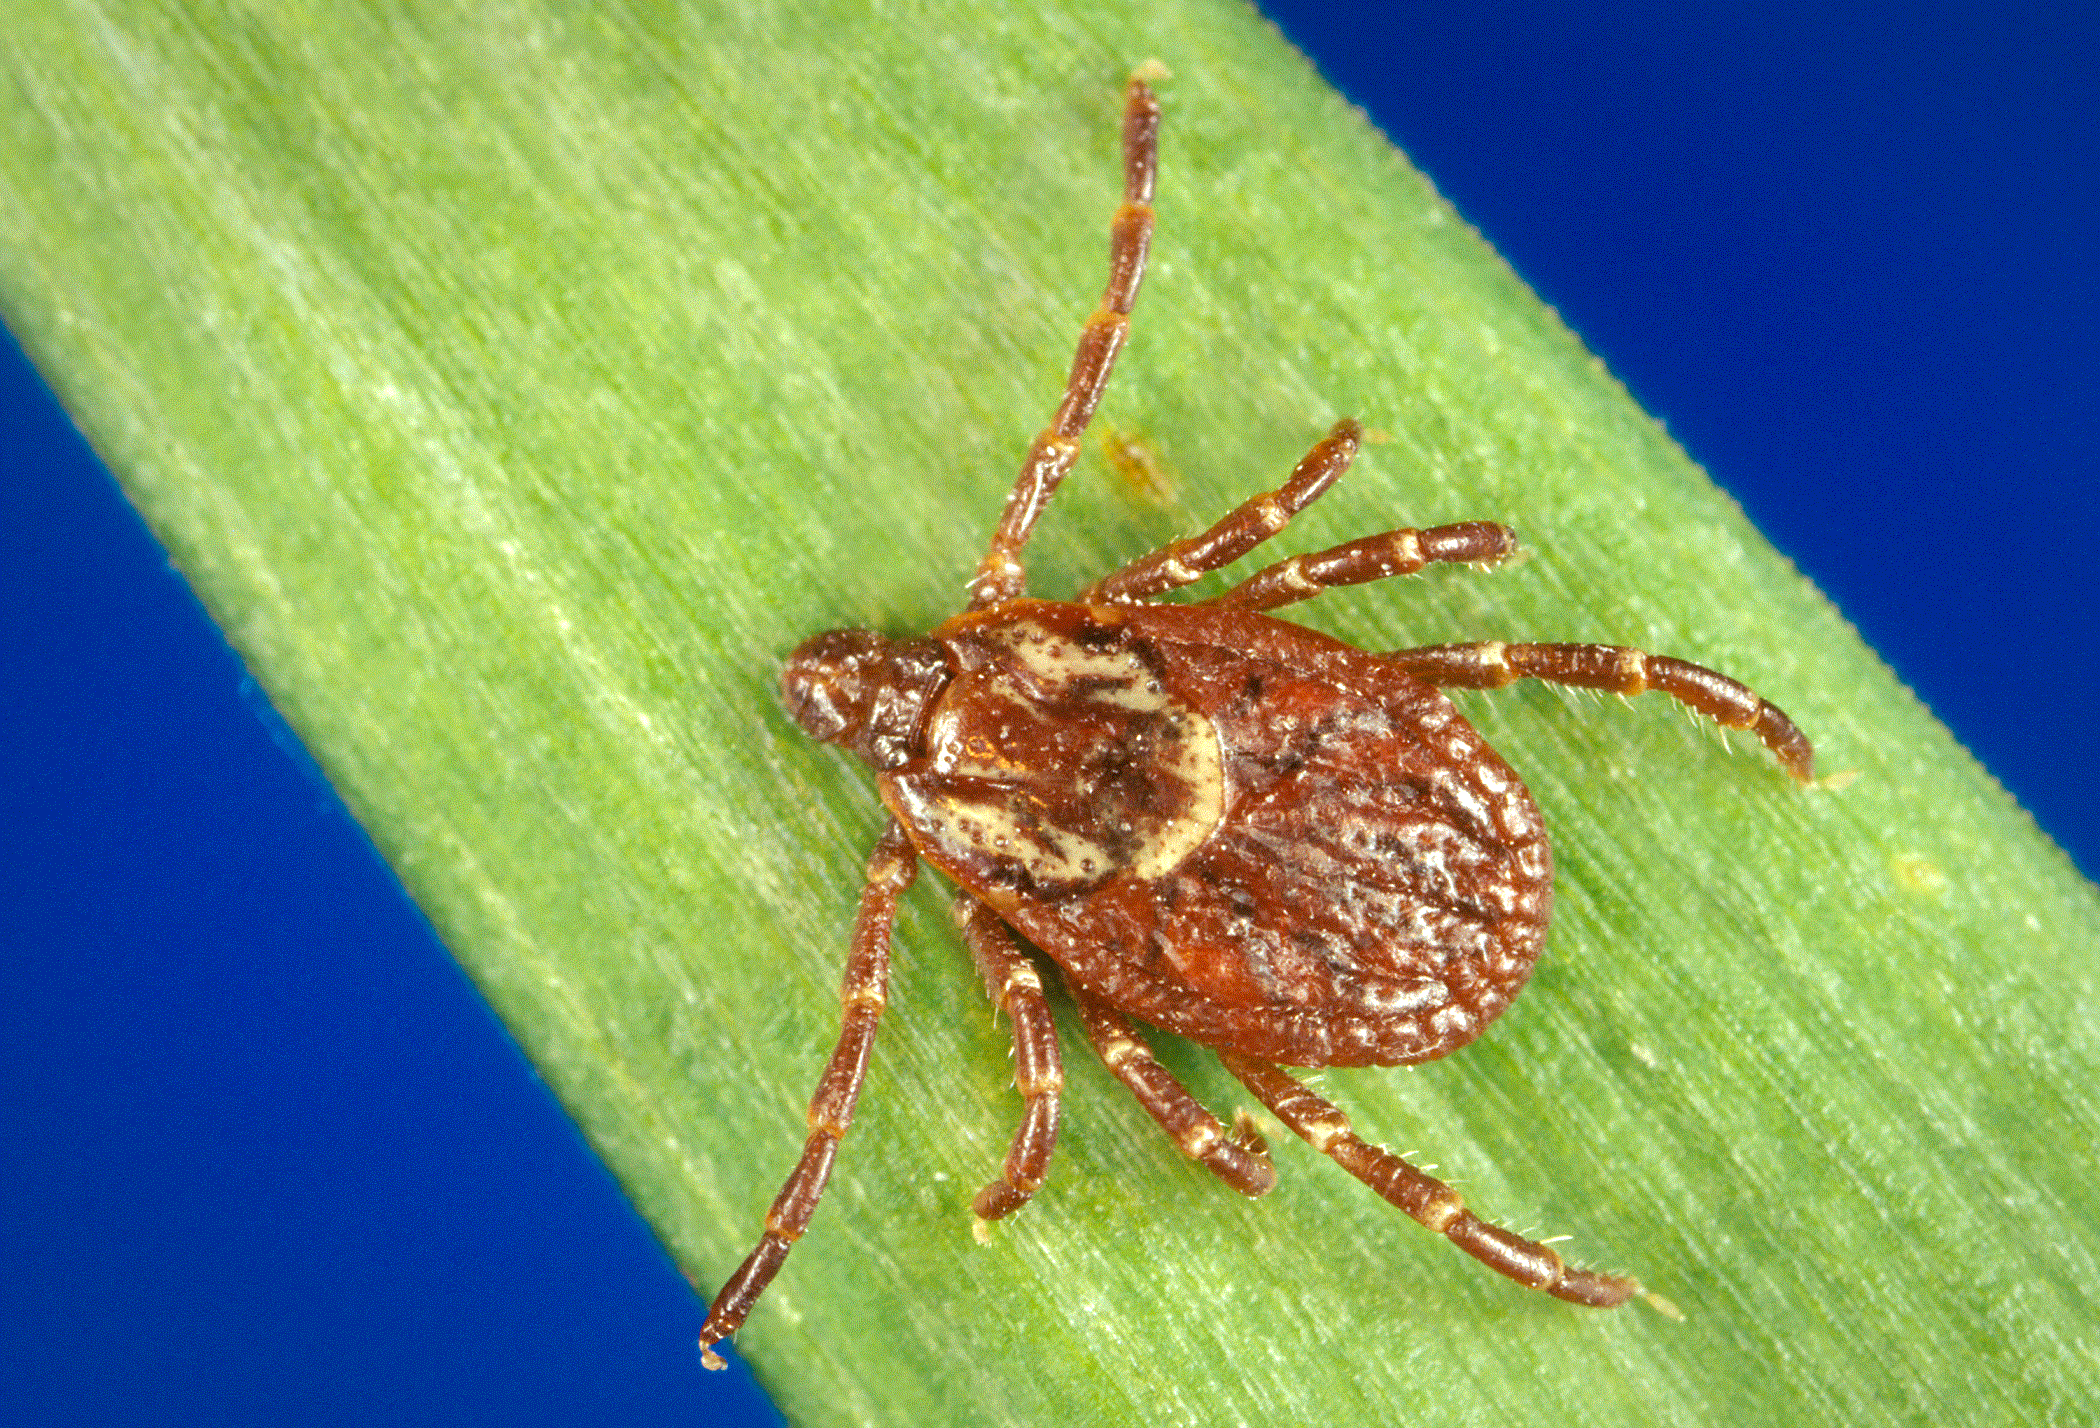 Image of a dog tick